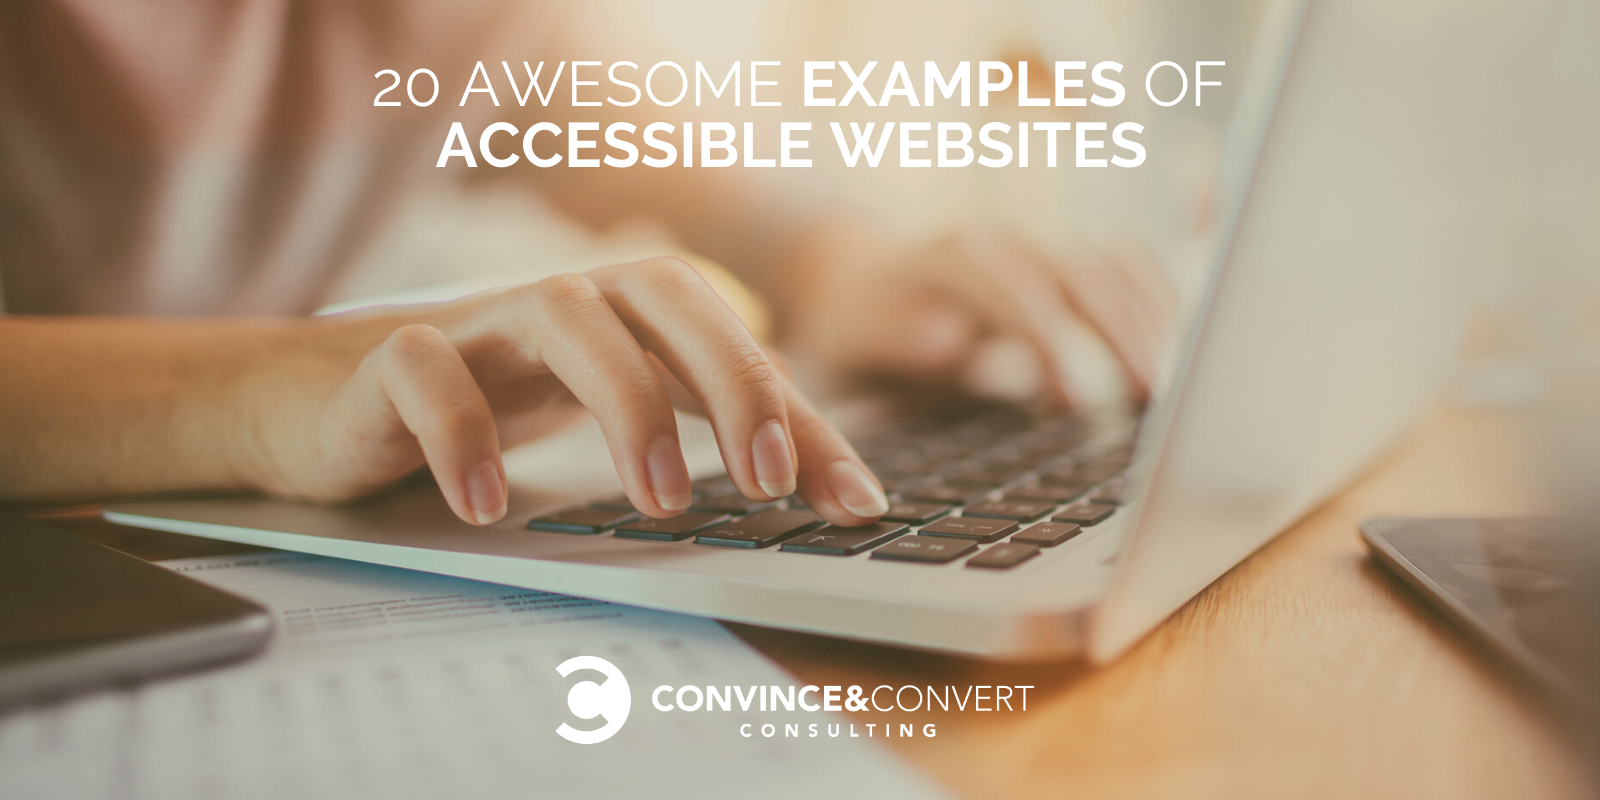 You are currently viewing 20 Awesome Examples of Accessible Websites